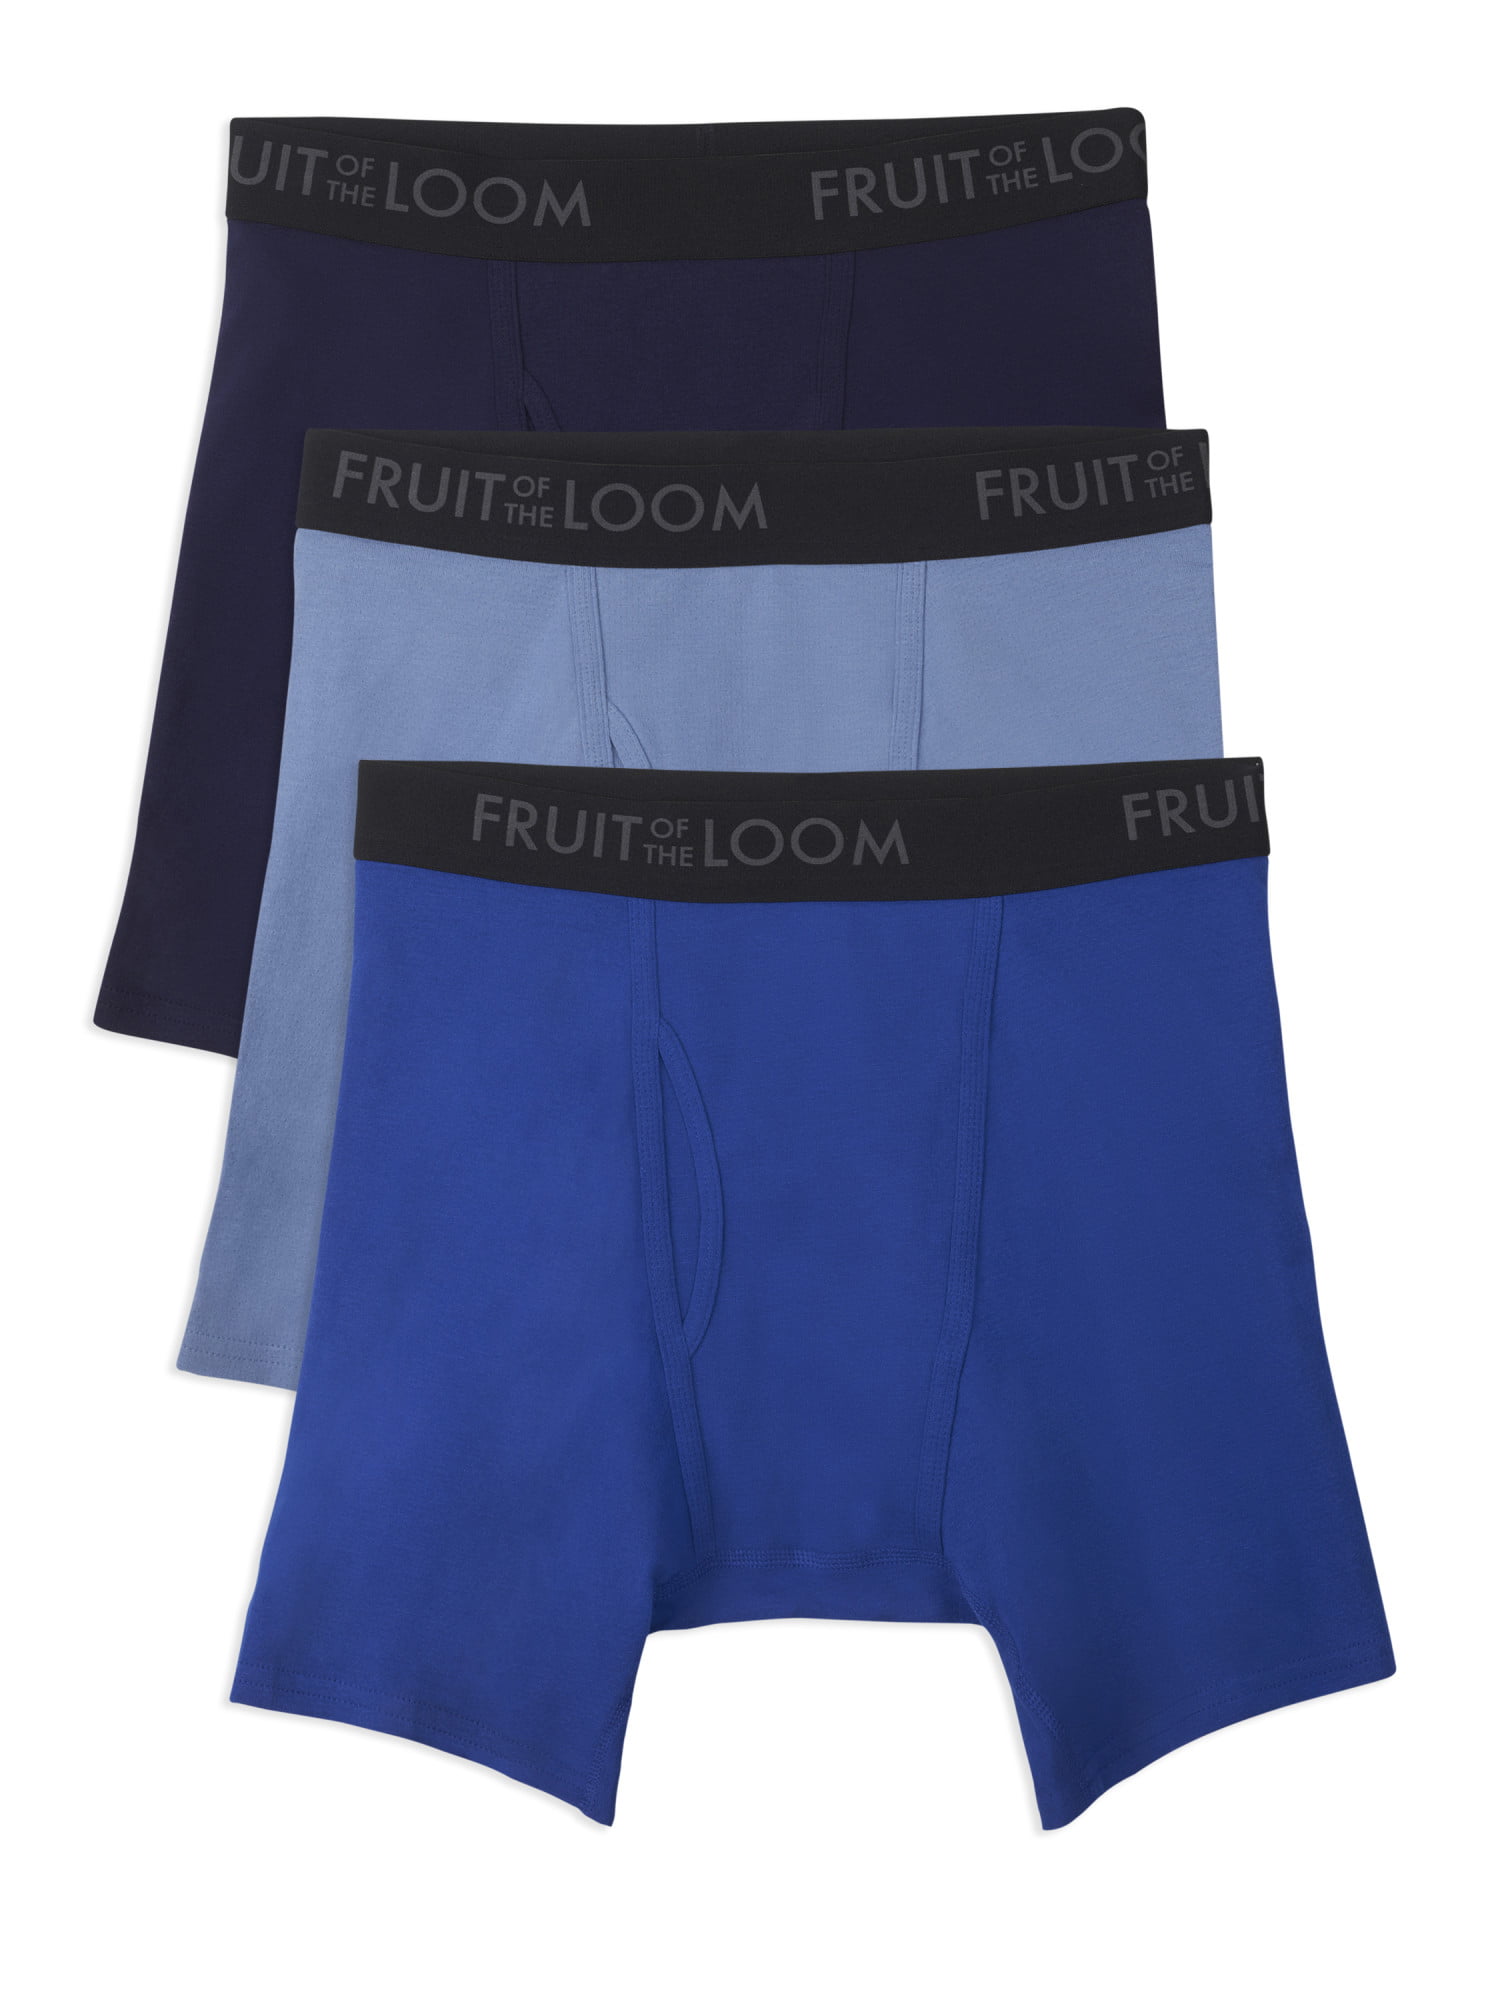 Fruit of the Loom Men's Breathable Cooling Cotton Micro Mesh Knit Boxer Lot